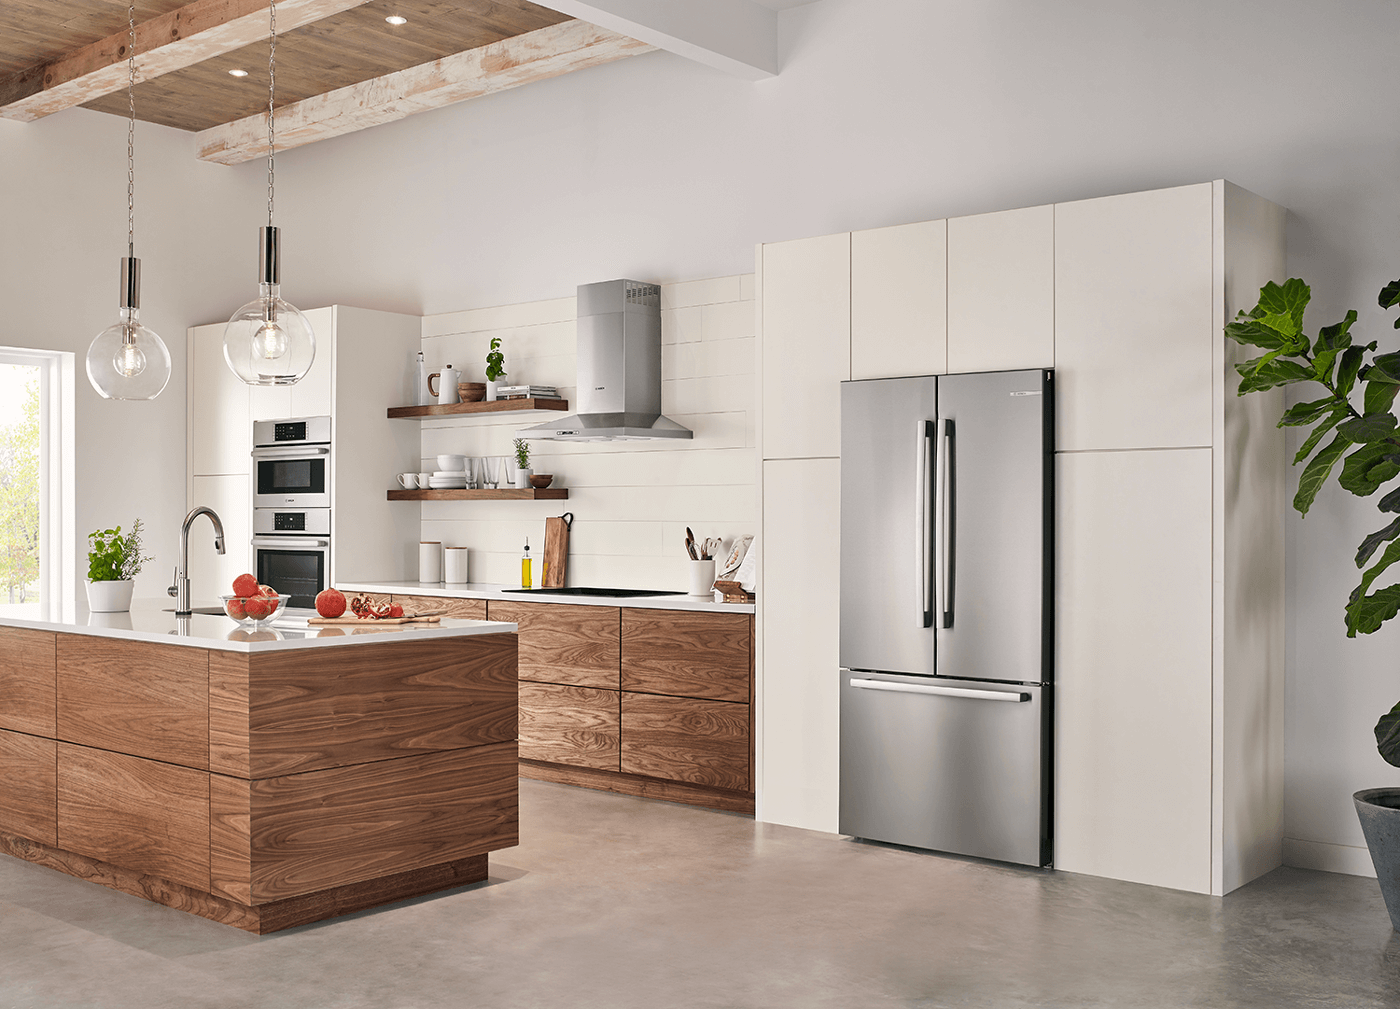 How to Make a Refrigerator Look Built-In: Sleek Design Tips